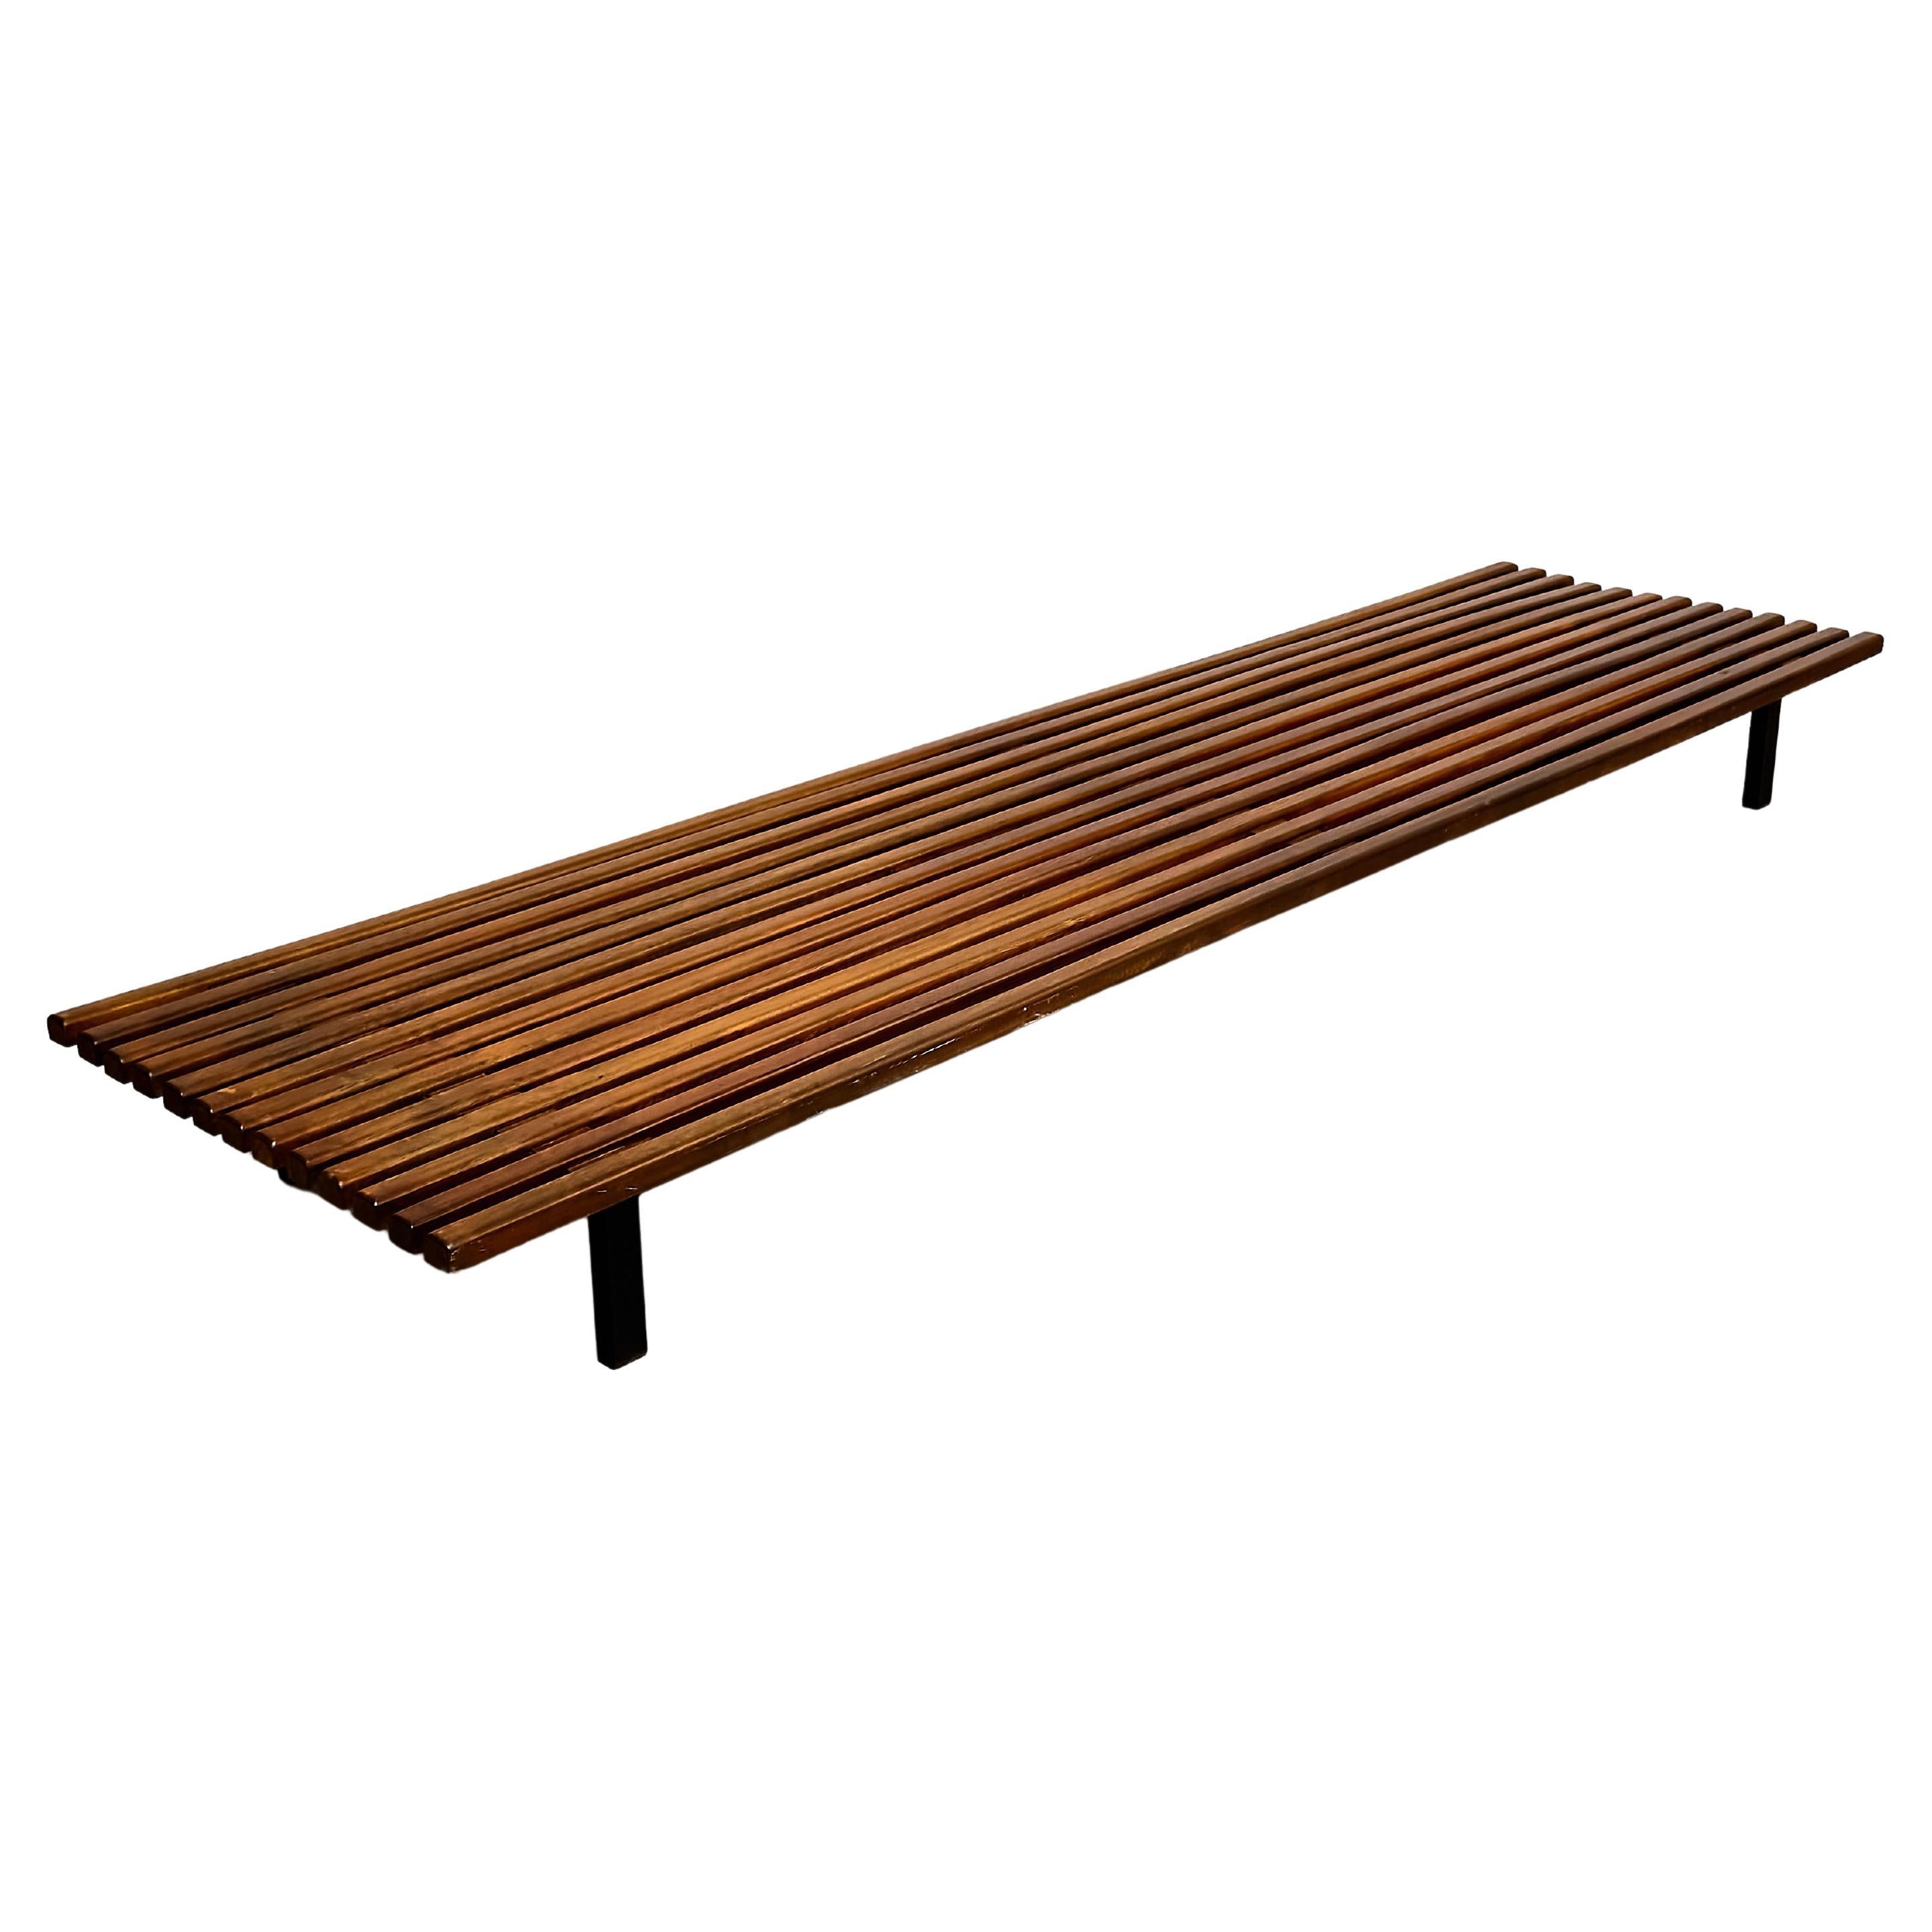 Charlotte Perriand Mid-Century Modern Cansado Bench, circa 1950 For Sale